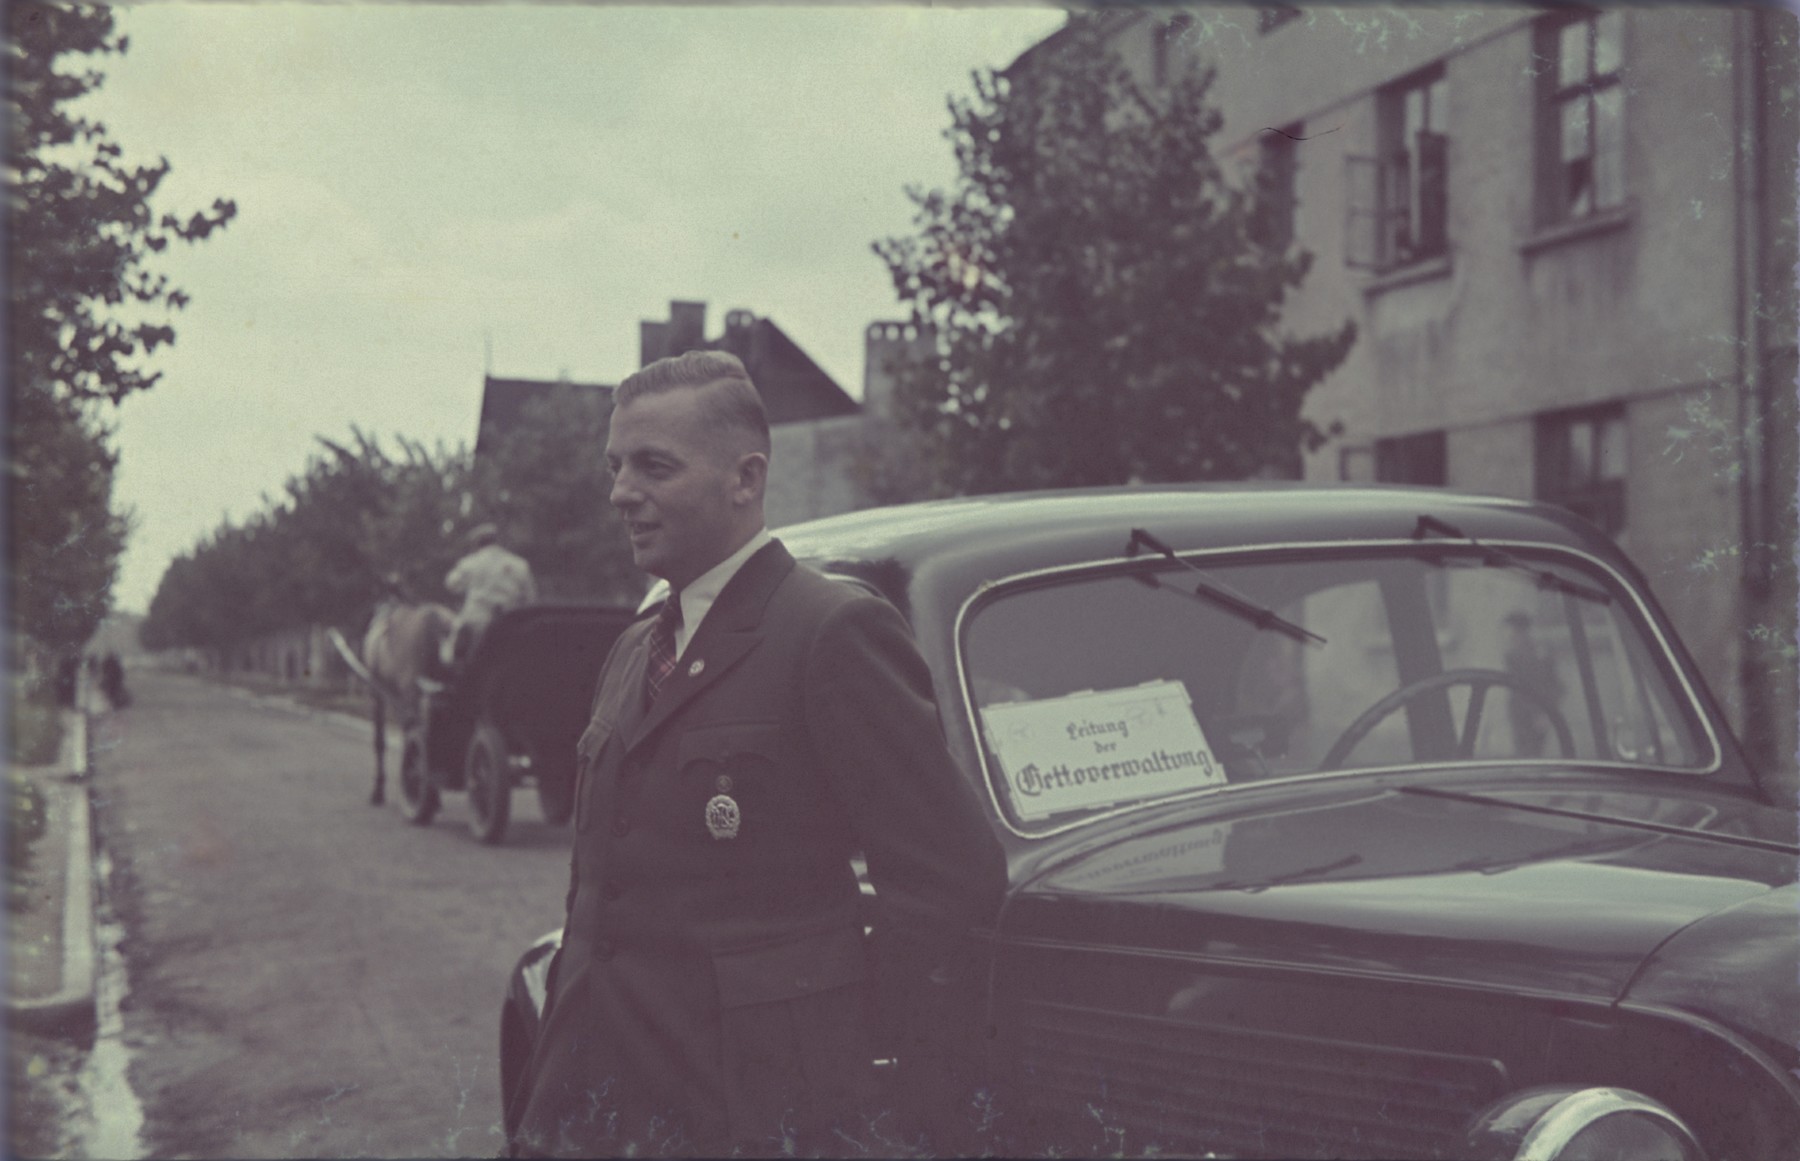 Hans Biebow, the Nazi administrator of  the Lodz ghetto,  poses in front of a car in the Lodz ghetto.

Original German caption: "Herr Biebow" (Mr. Biebow), #155.